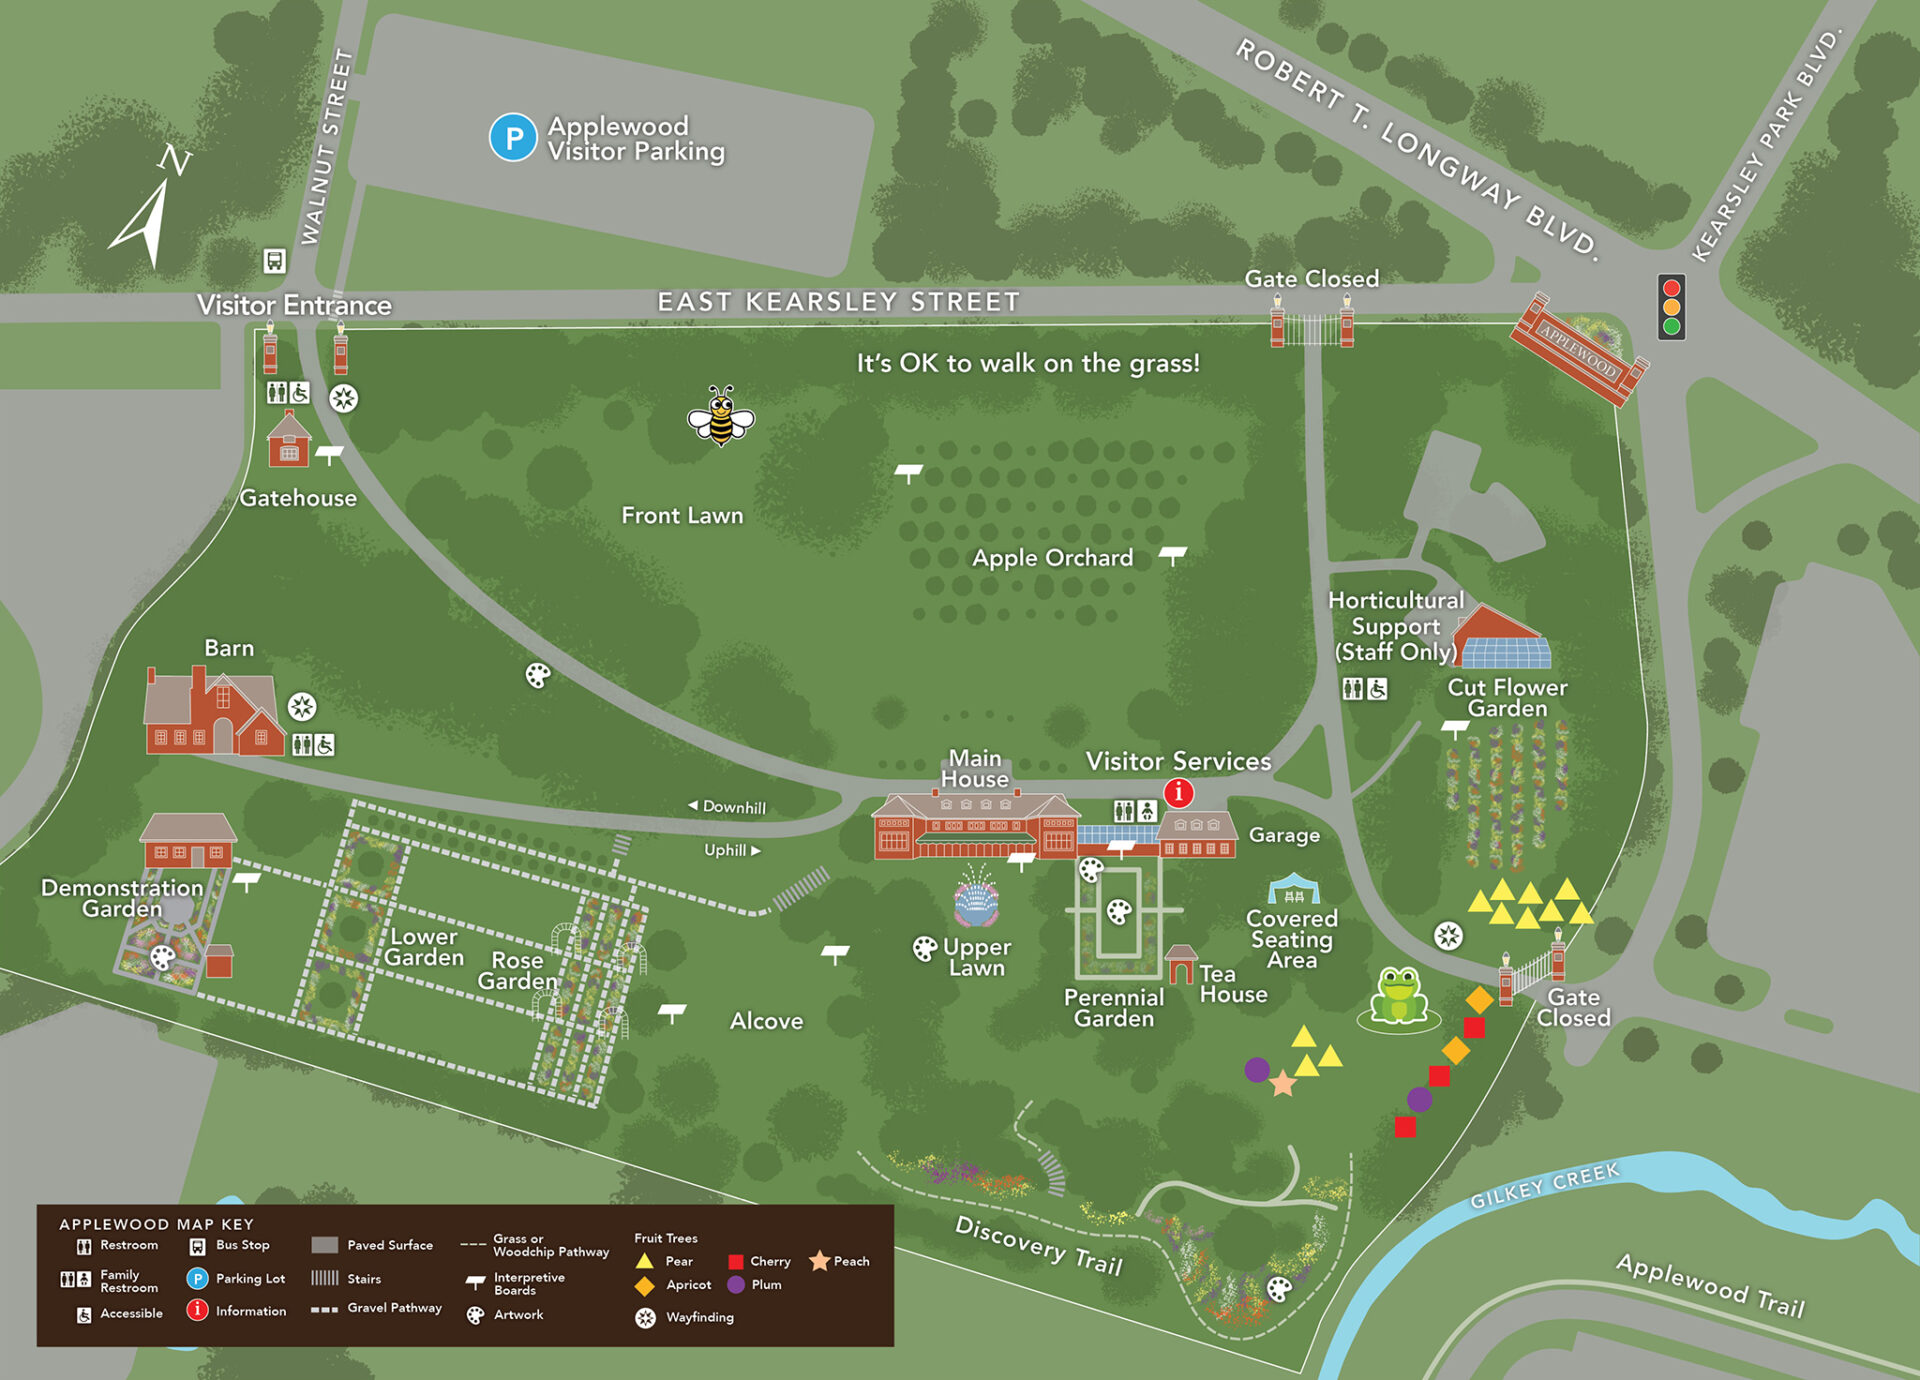 A graphic map of Applewood showing the main house, paths, and the Visitor Parking Lot & Entrance.